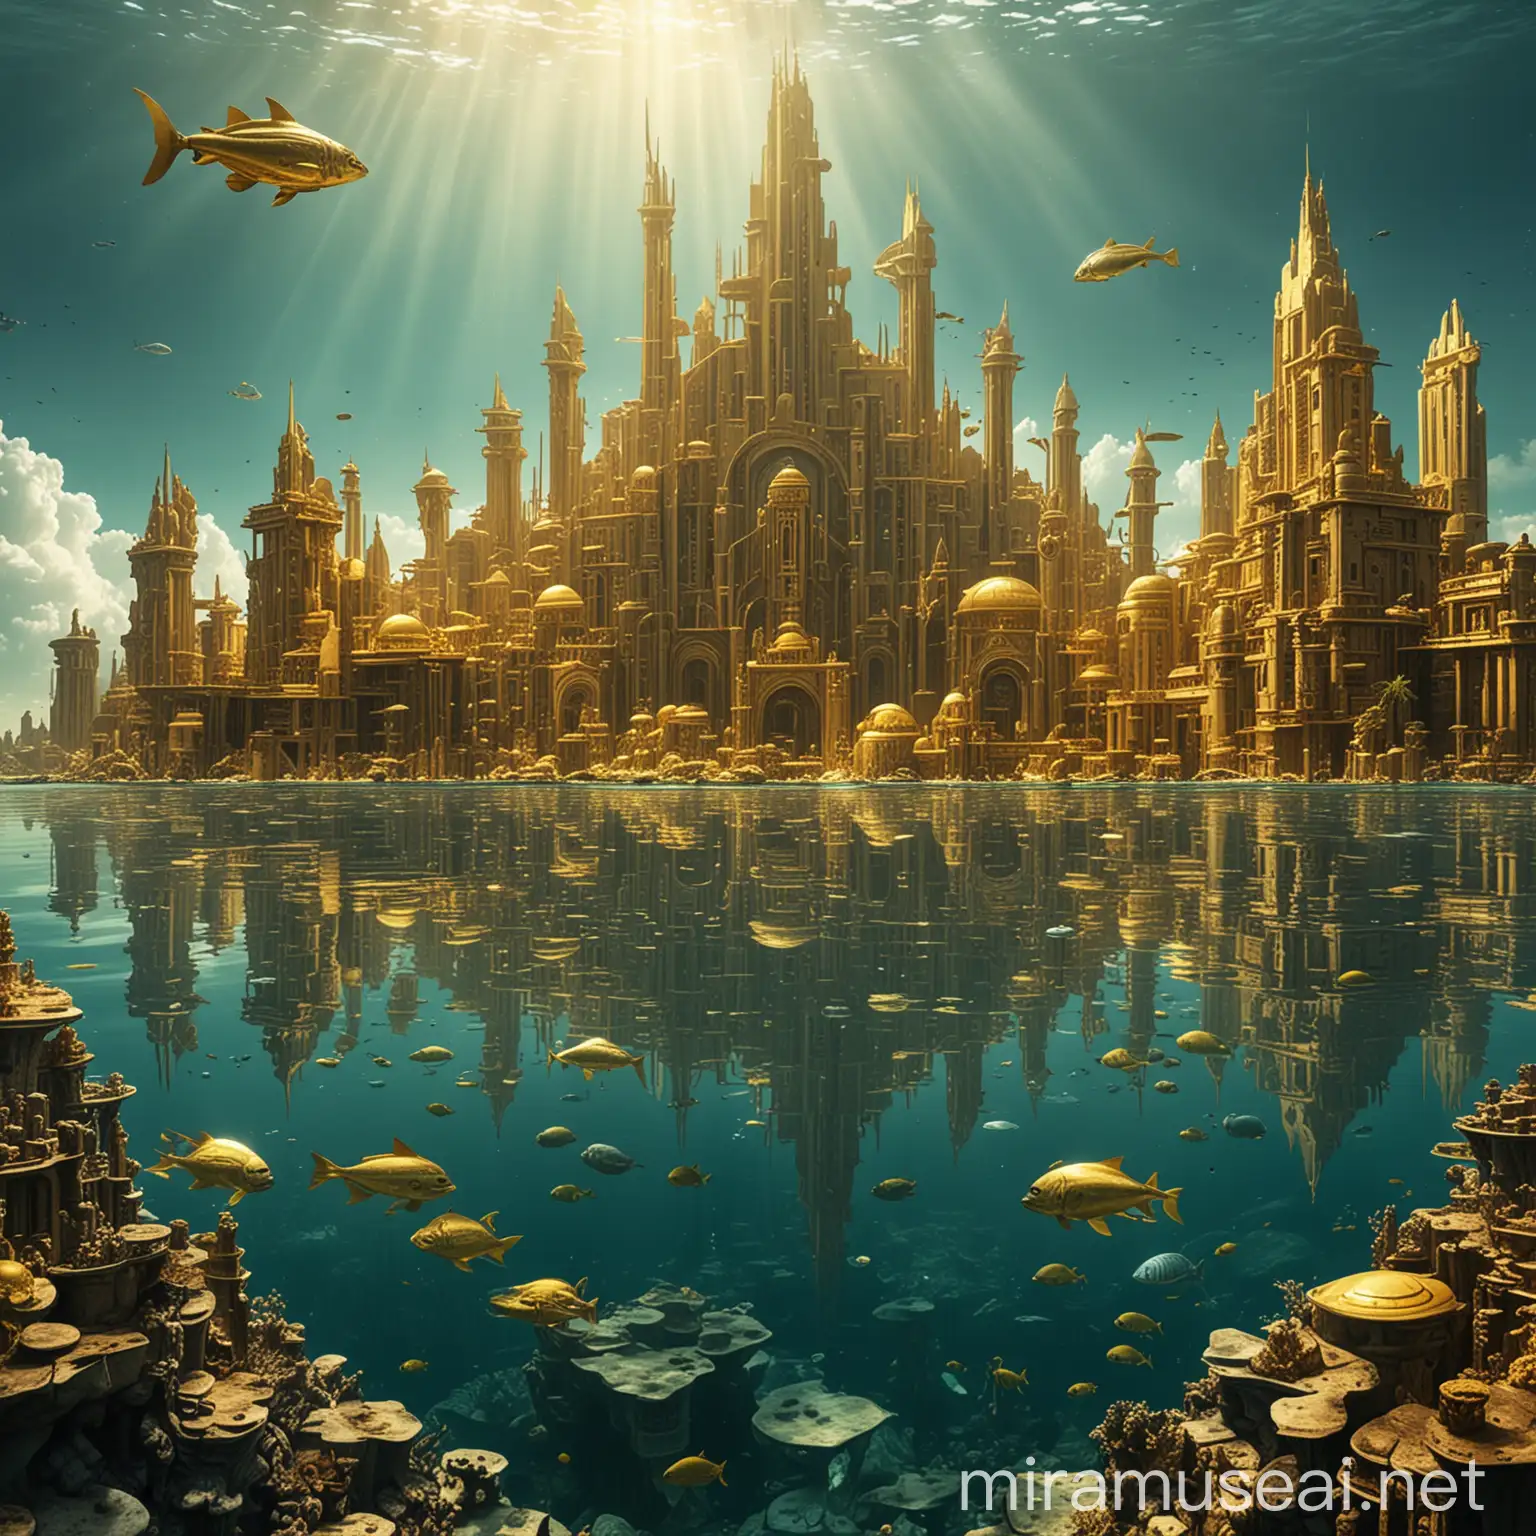 The golden underwater city of Atlantis is submerged underwater. It is well outlined and stands out against the water. The city features futuristic buildings of yellow-gold color. The image is highly detailed.